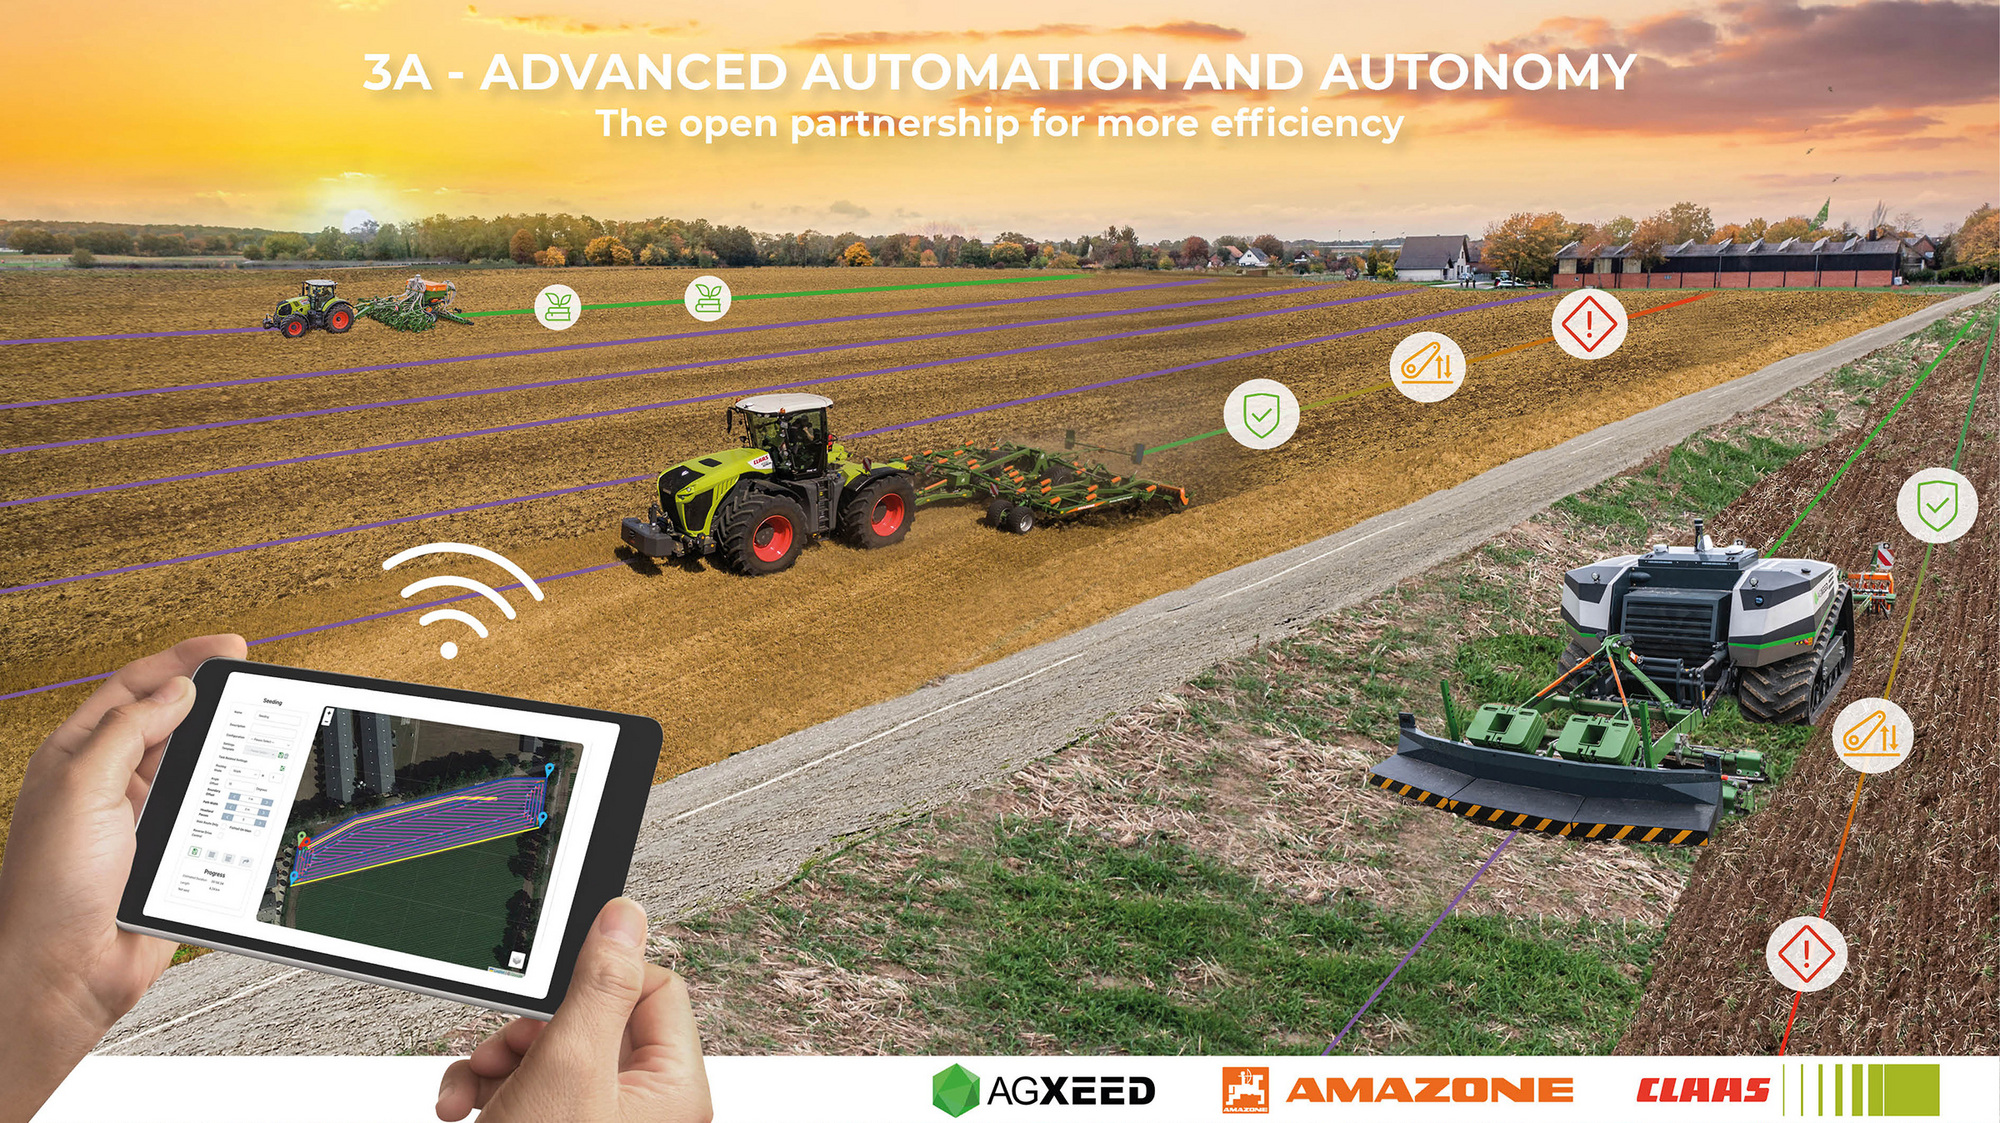 csm_Claas_Amzon3A_Automation_and_Aut2400pxweb_f6b5fd9022.jpg